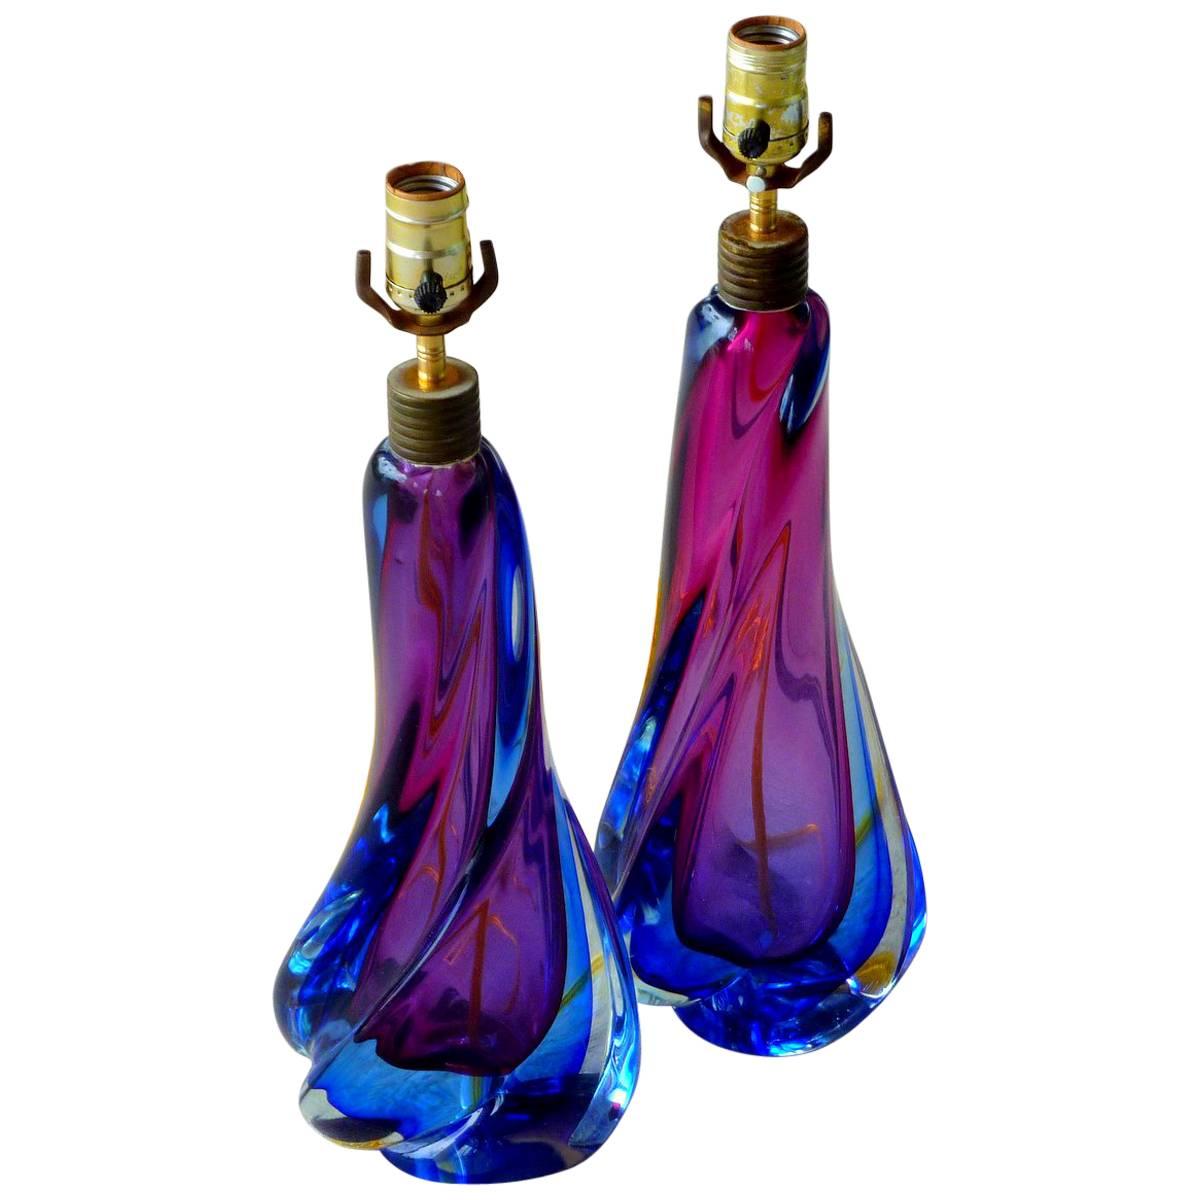 Pair of Art Glass Lamps by Flavio Poli for Seguso